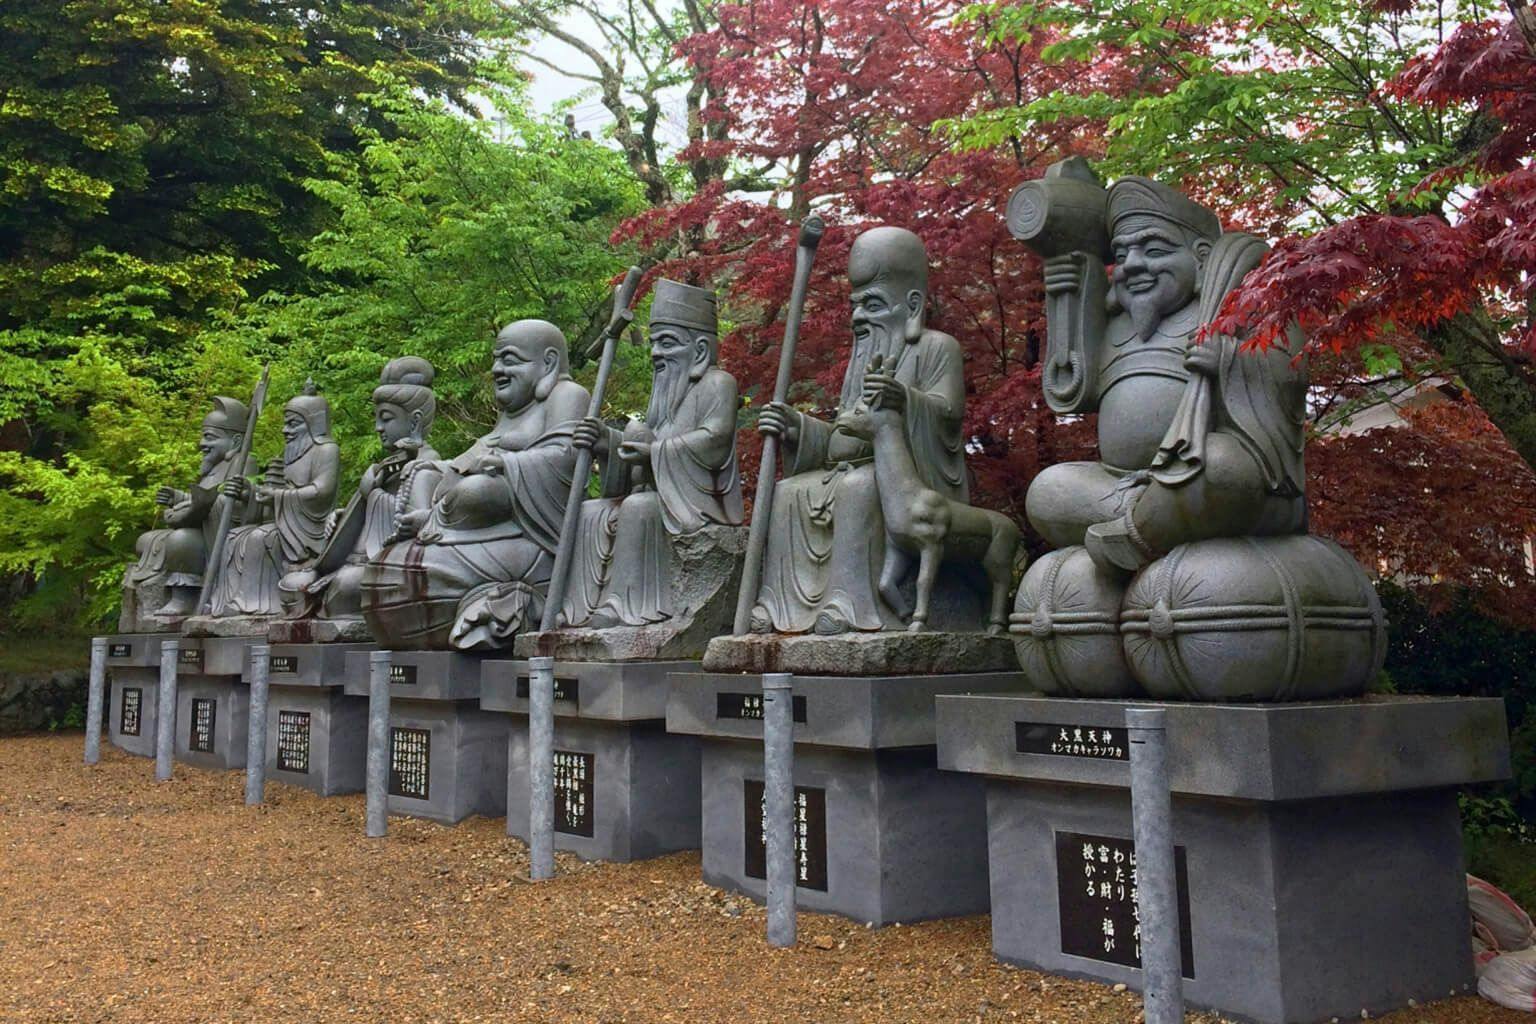 Large statues of each of the Seven Lucky Gods at Byakugoji temple (白毫寺), located in Tamba, Hyogo prefecture.